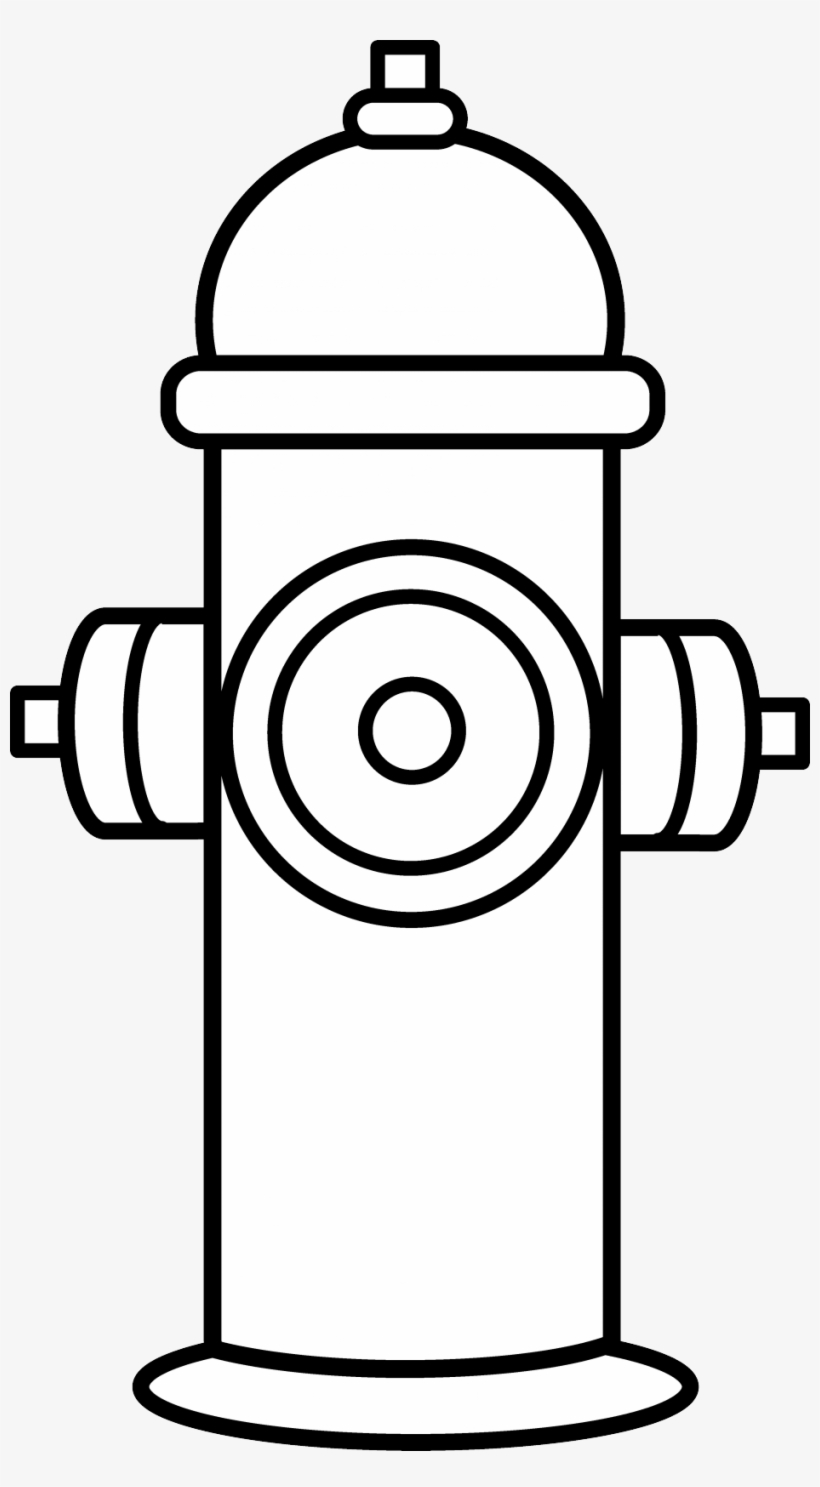 Fire Coloring Page Jacb Me Hat Inside - Fire Hydrant Black And White, transparent png #4226269